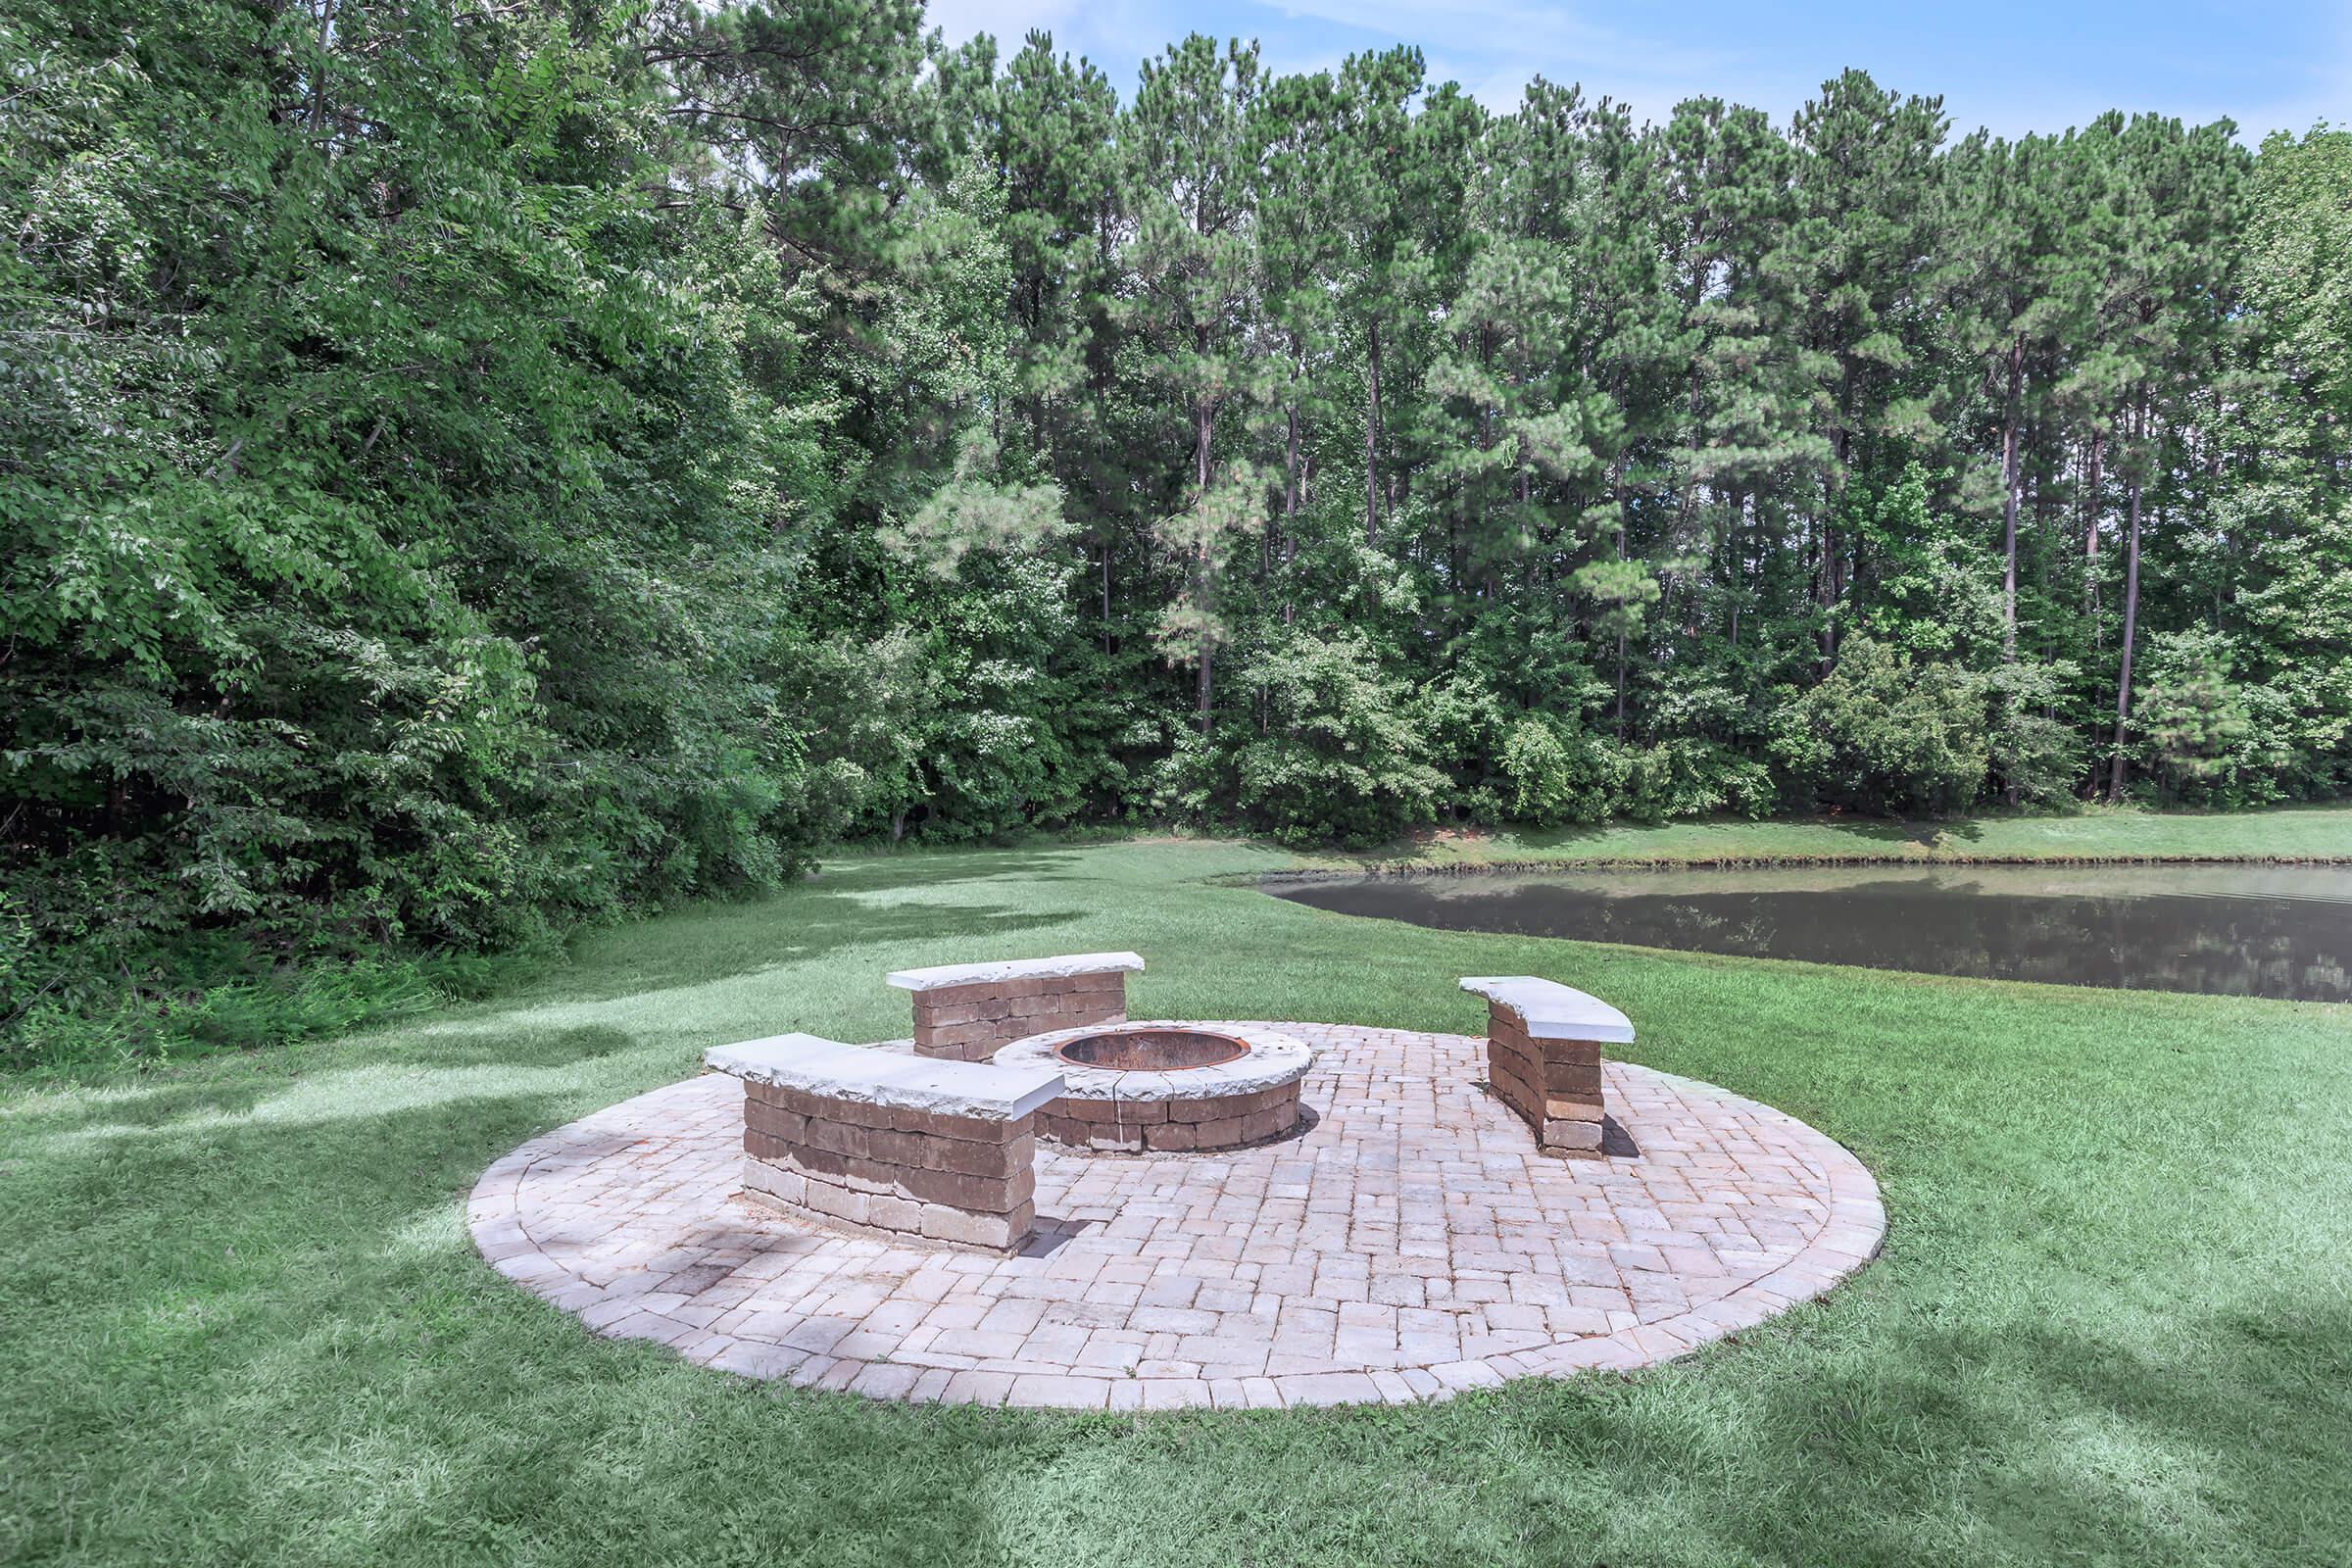 Cozy Up To The Fire Pit Here At Cooper's Ridge in Ladson, South Carolina